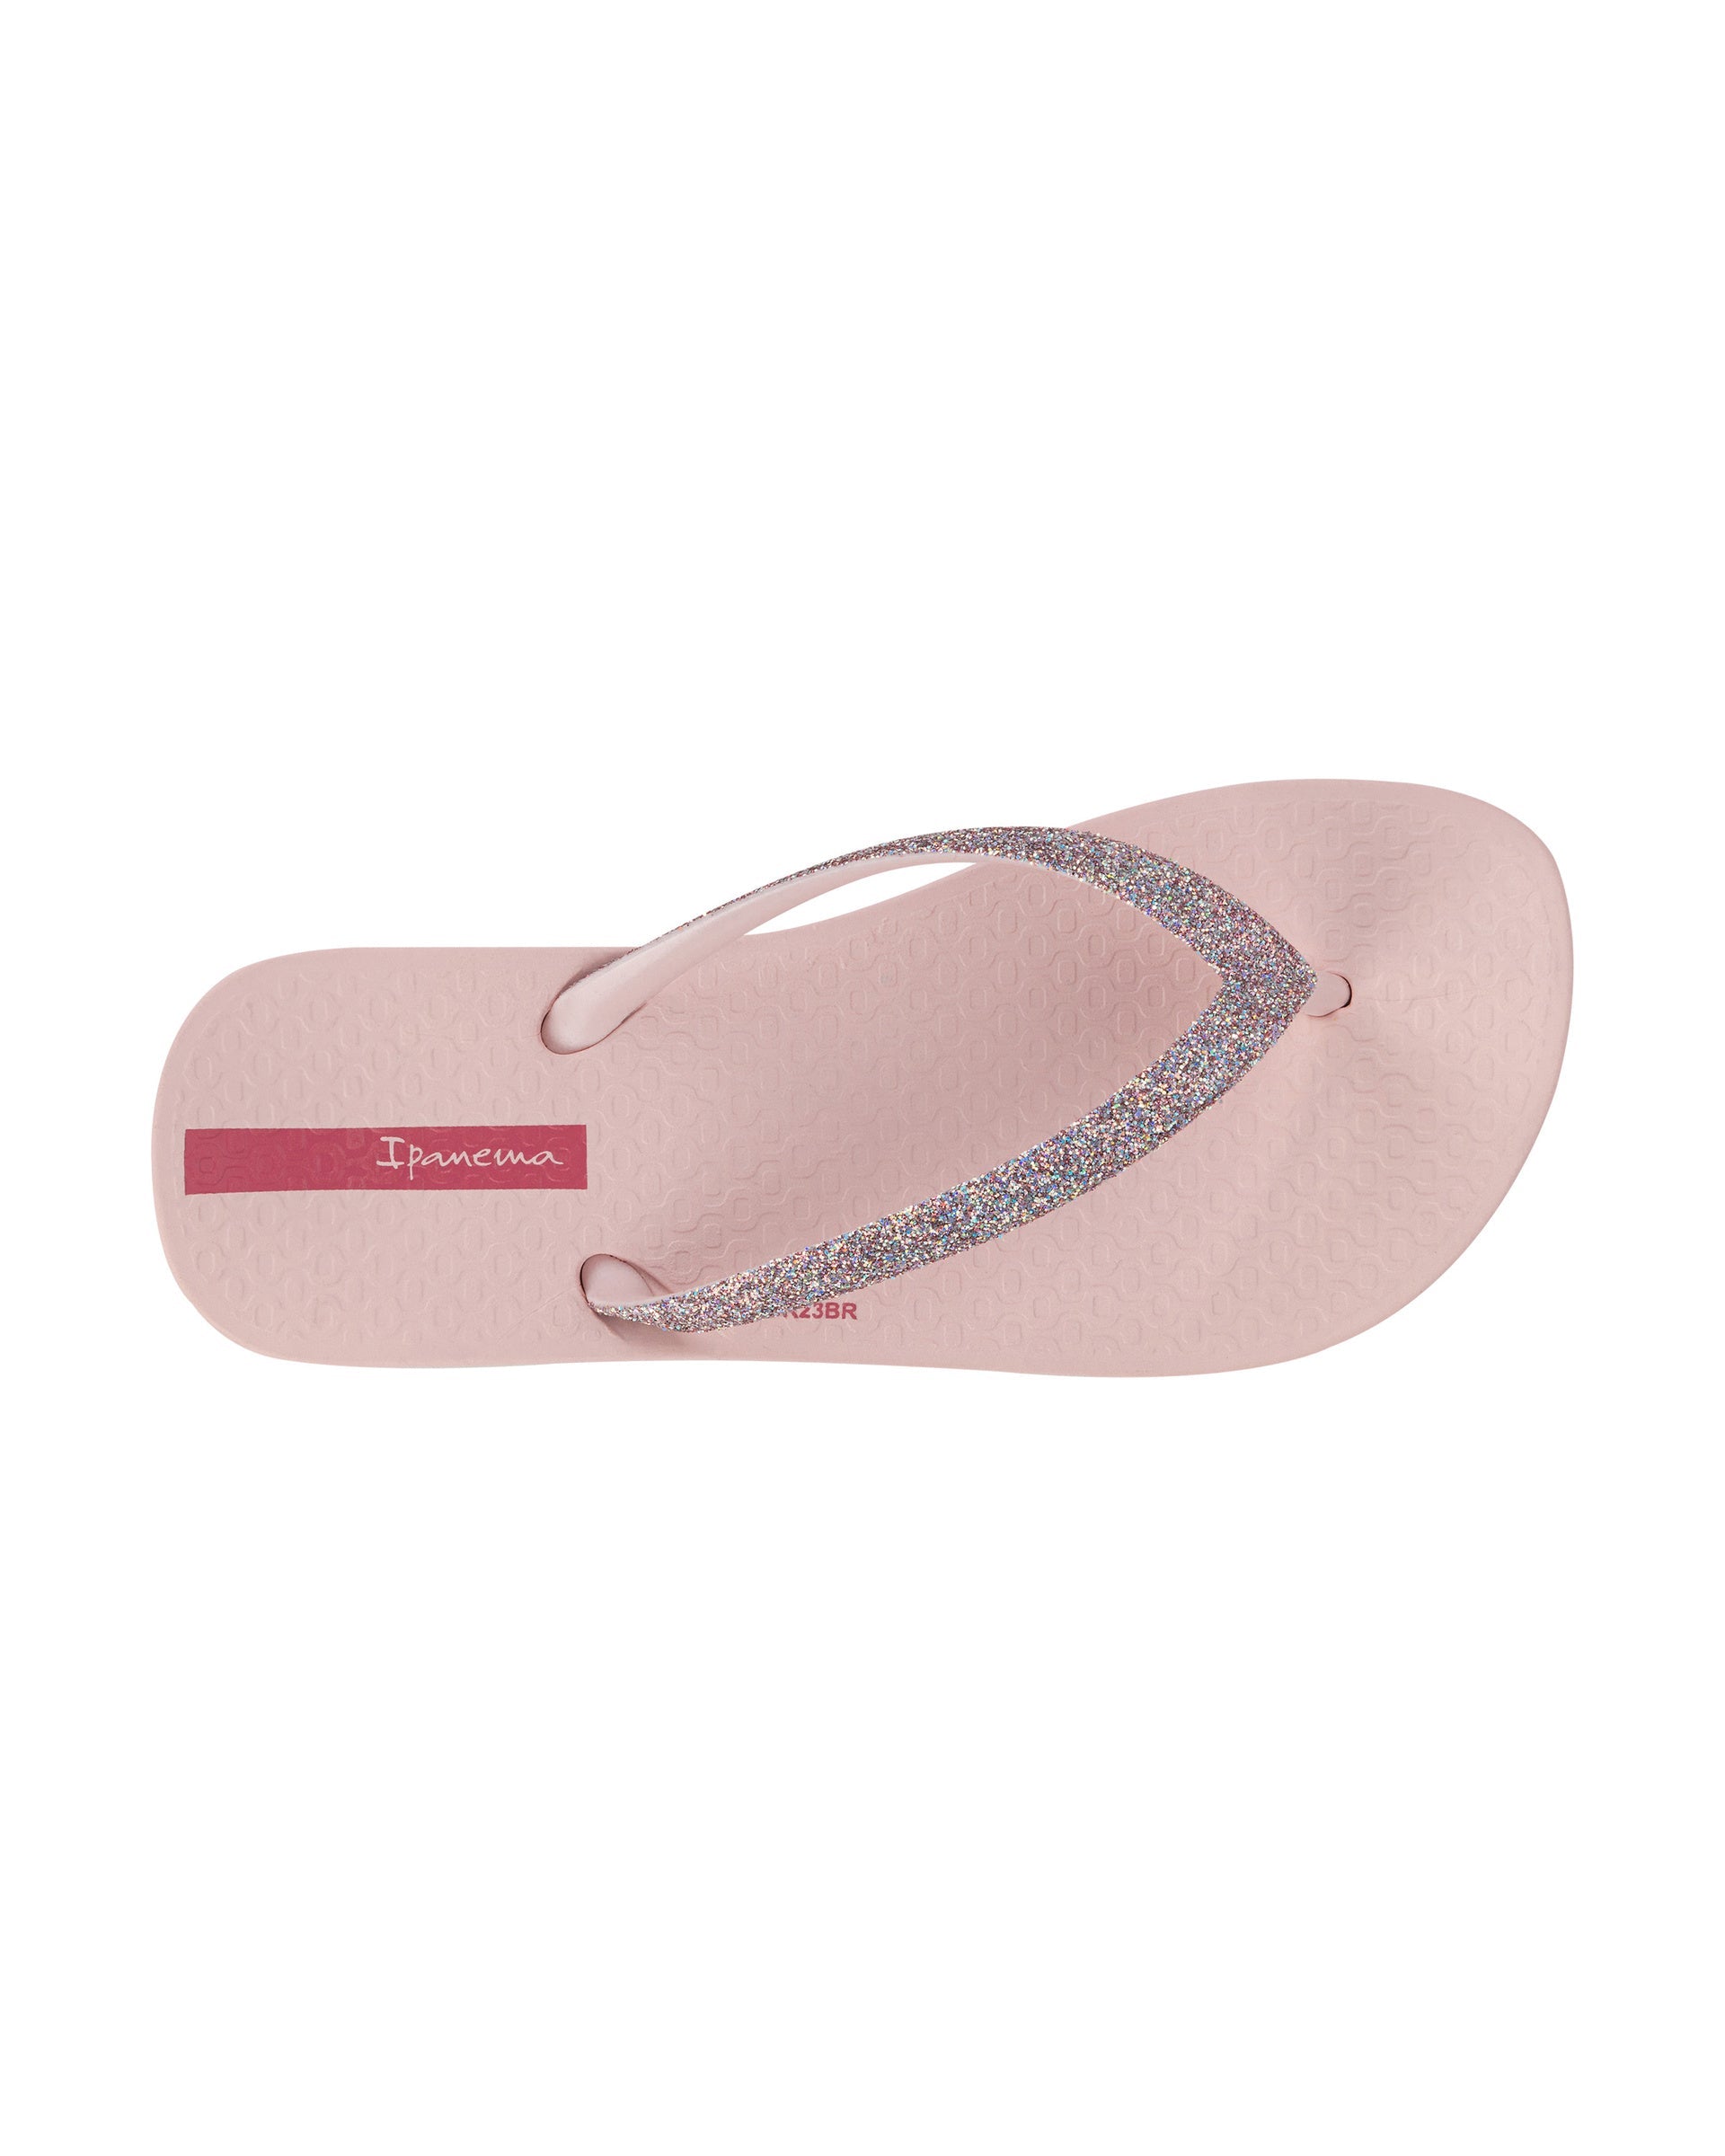 Top view of a pink Ipanema Ana Sparkle kids flip flop with multicolor glitter strap.